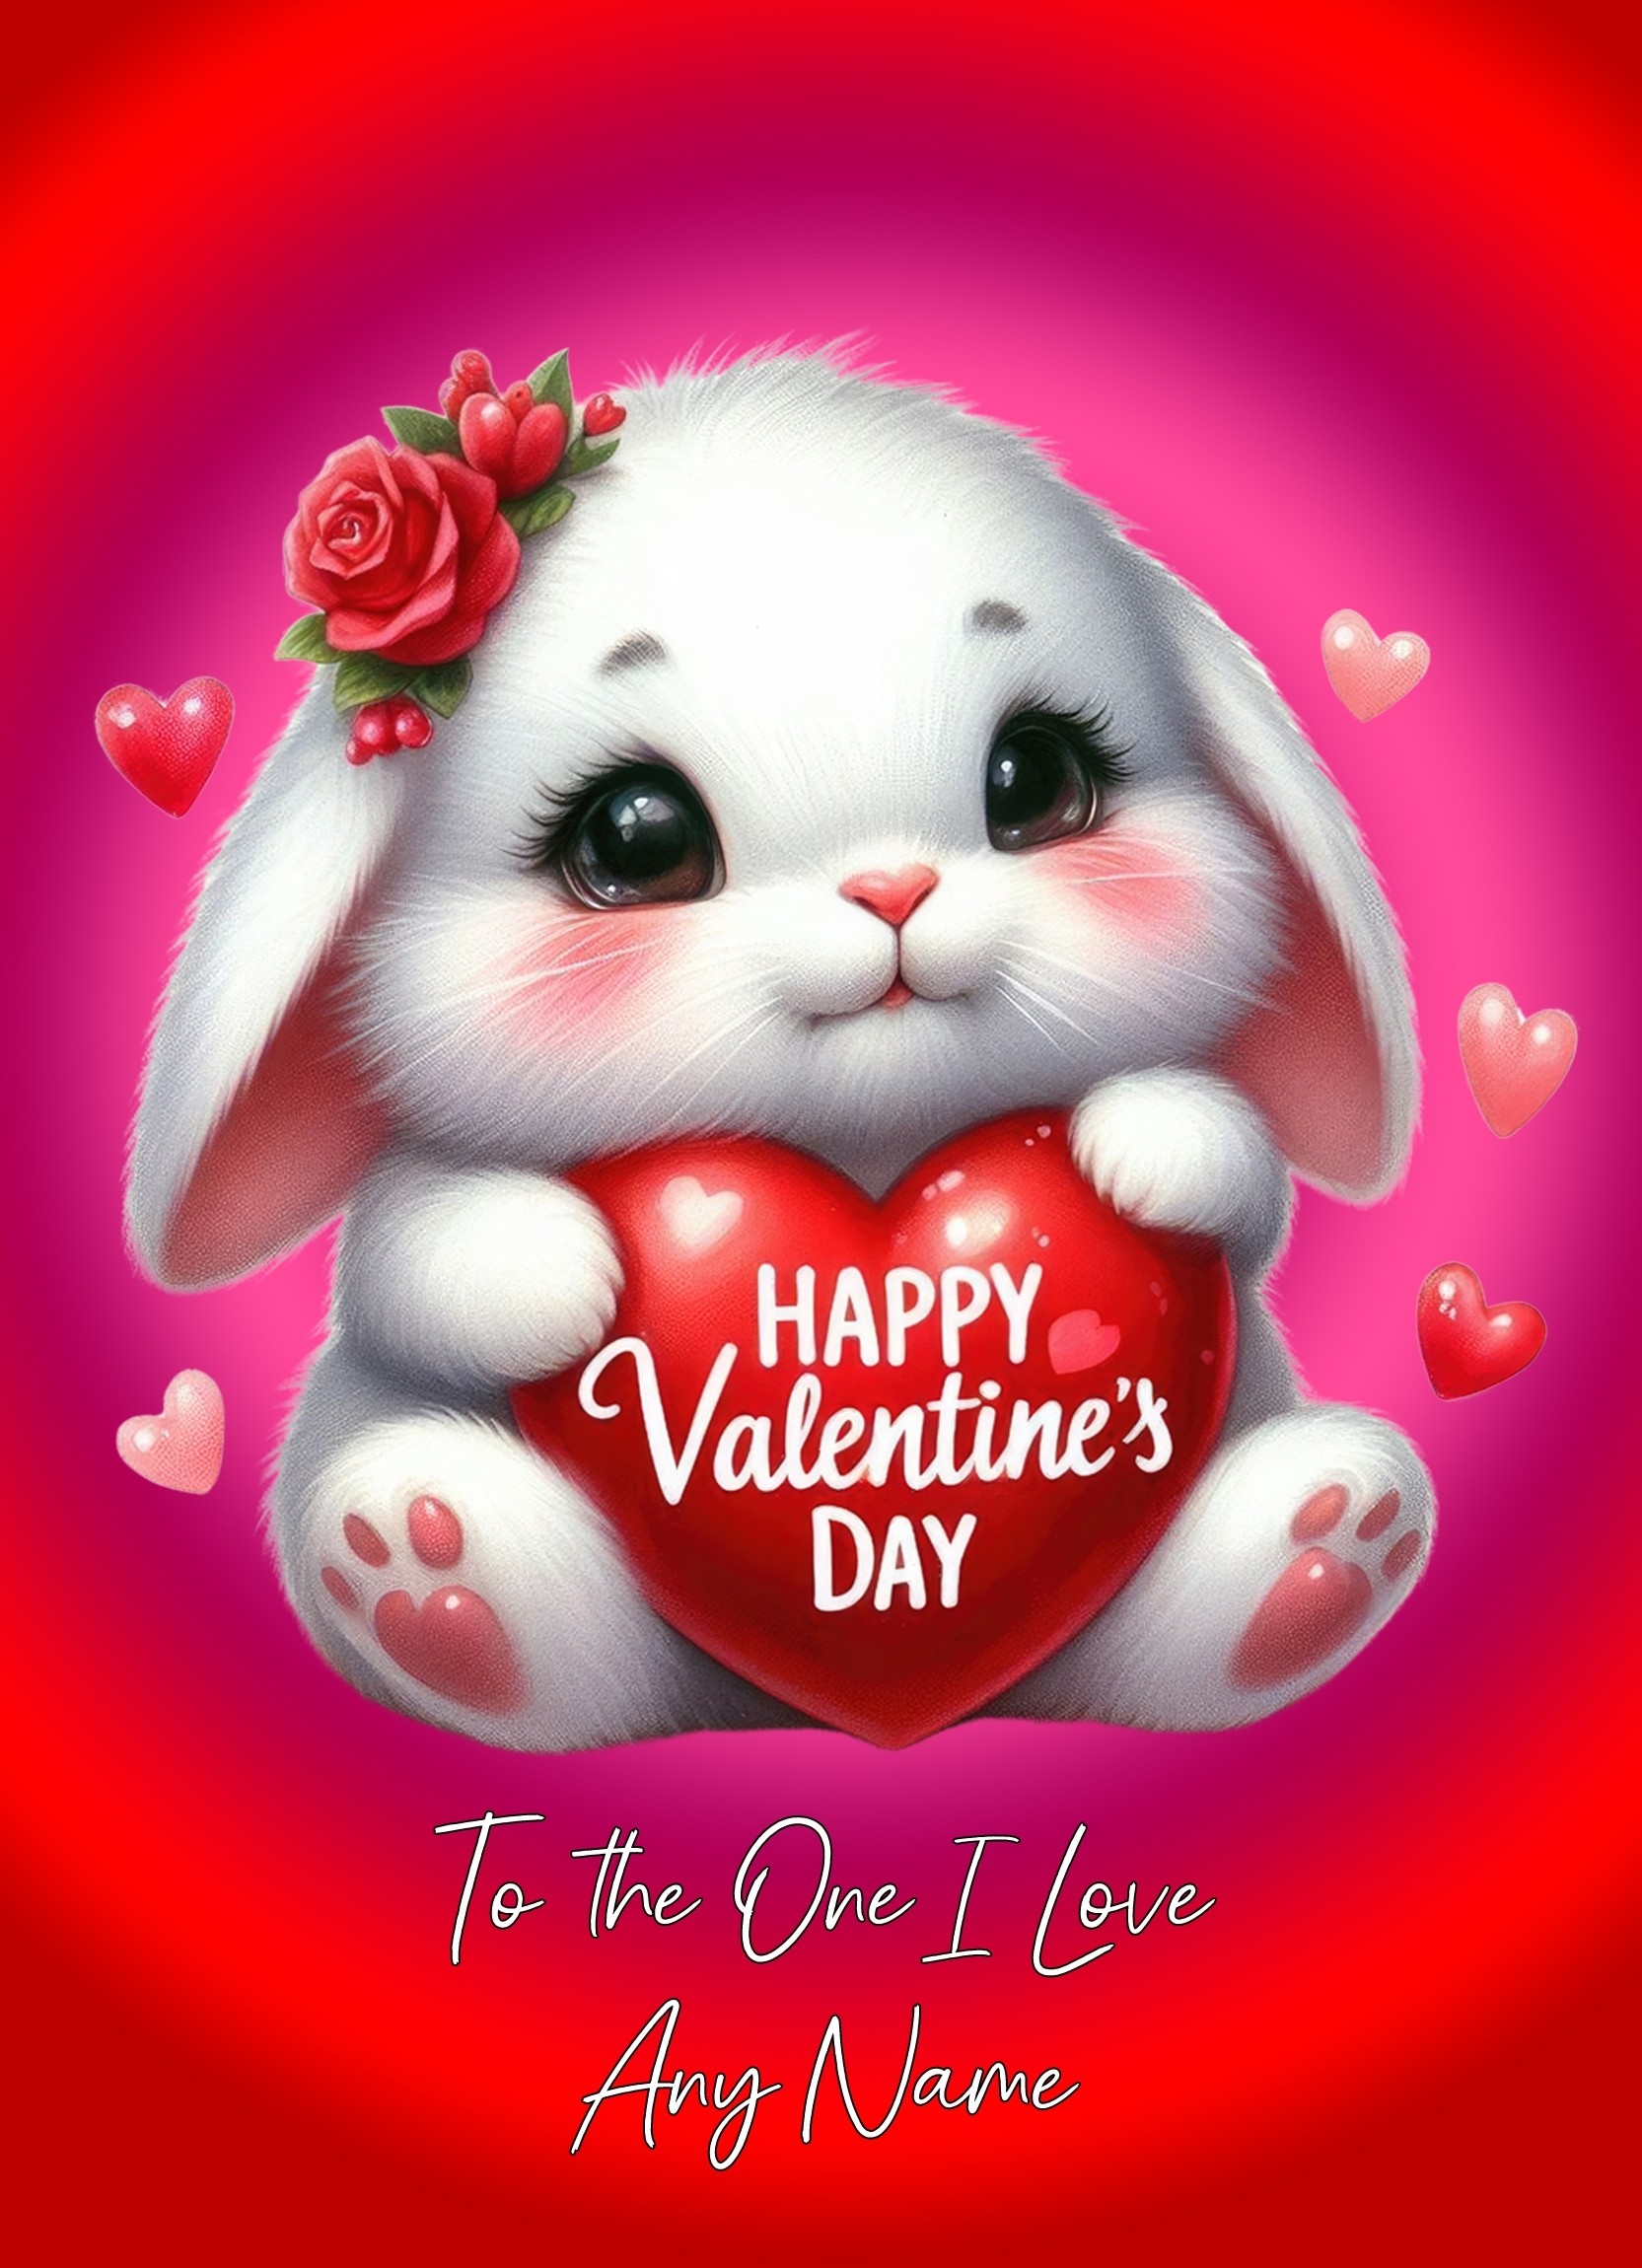 Personalised Valentines Day Card for One I Love (Rabbit)